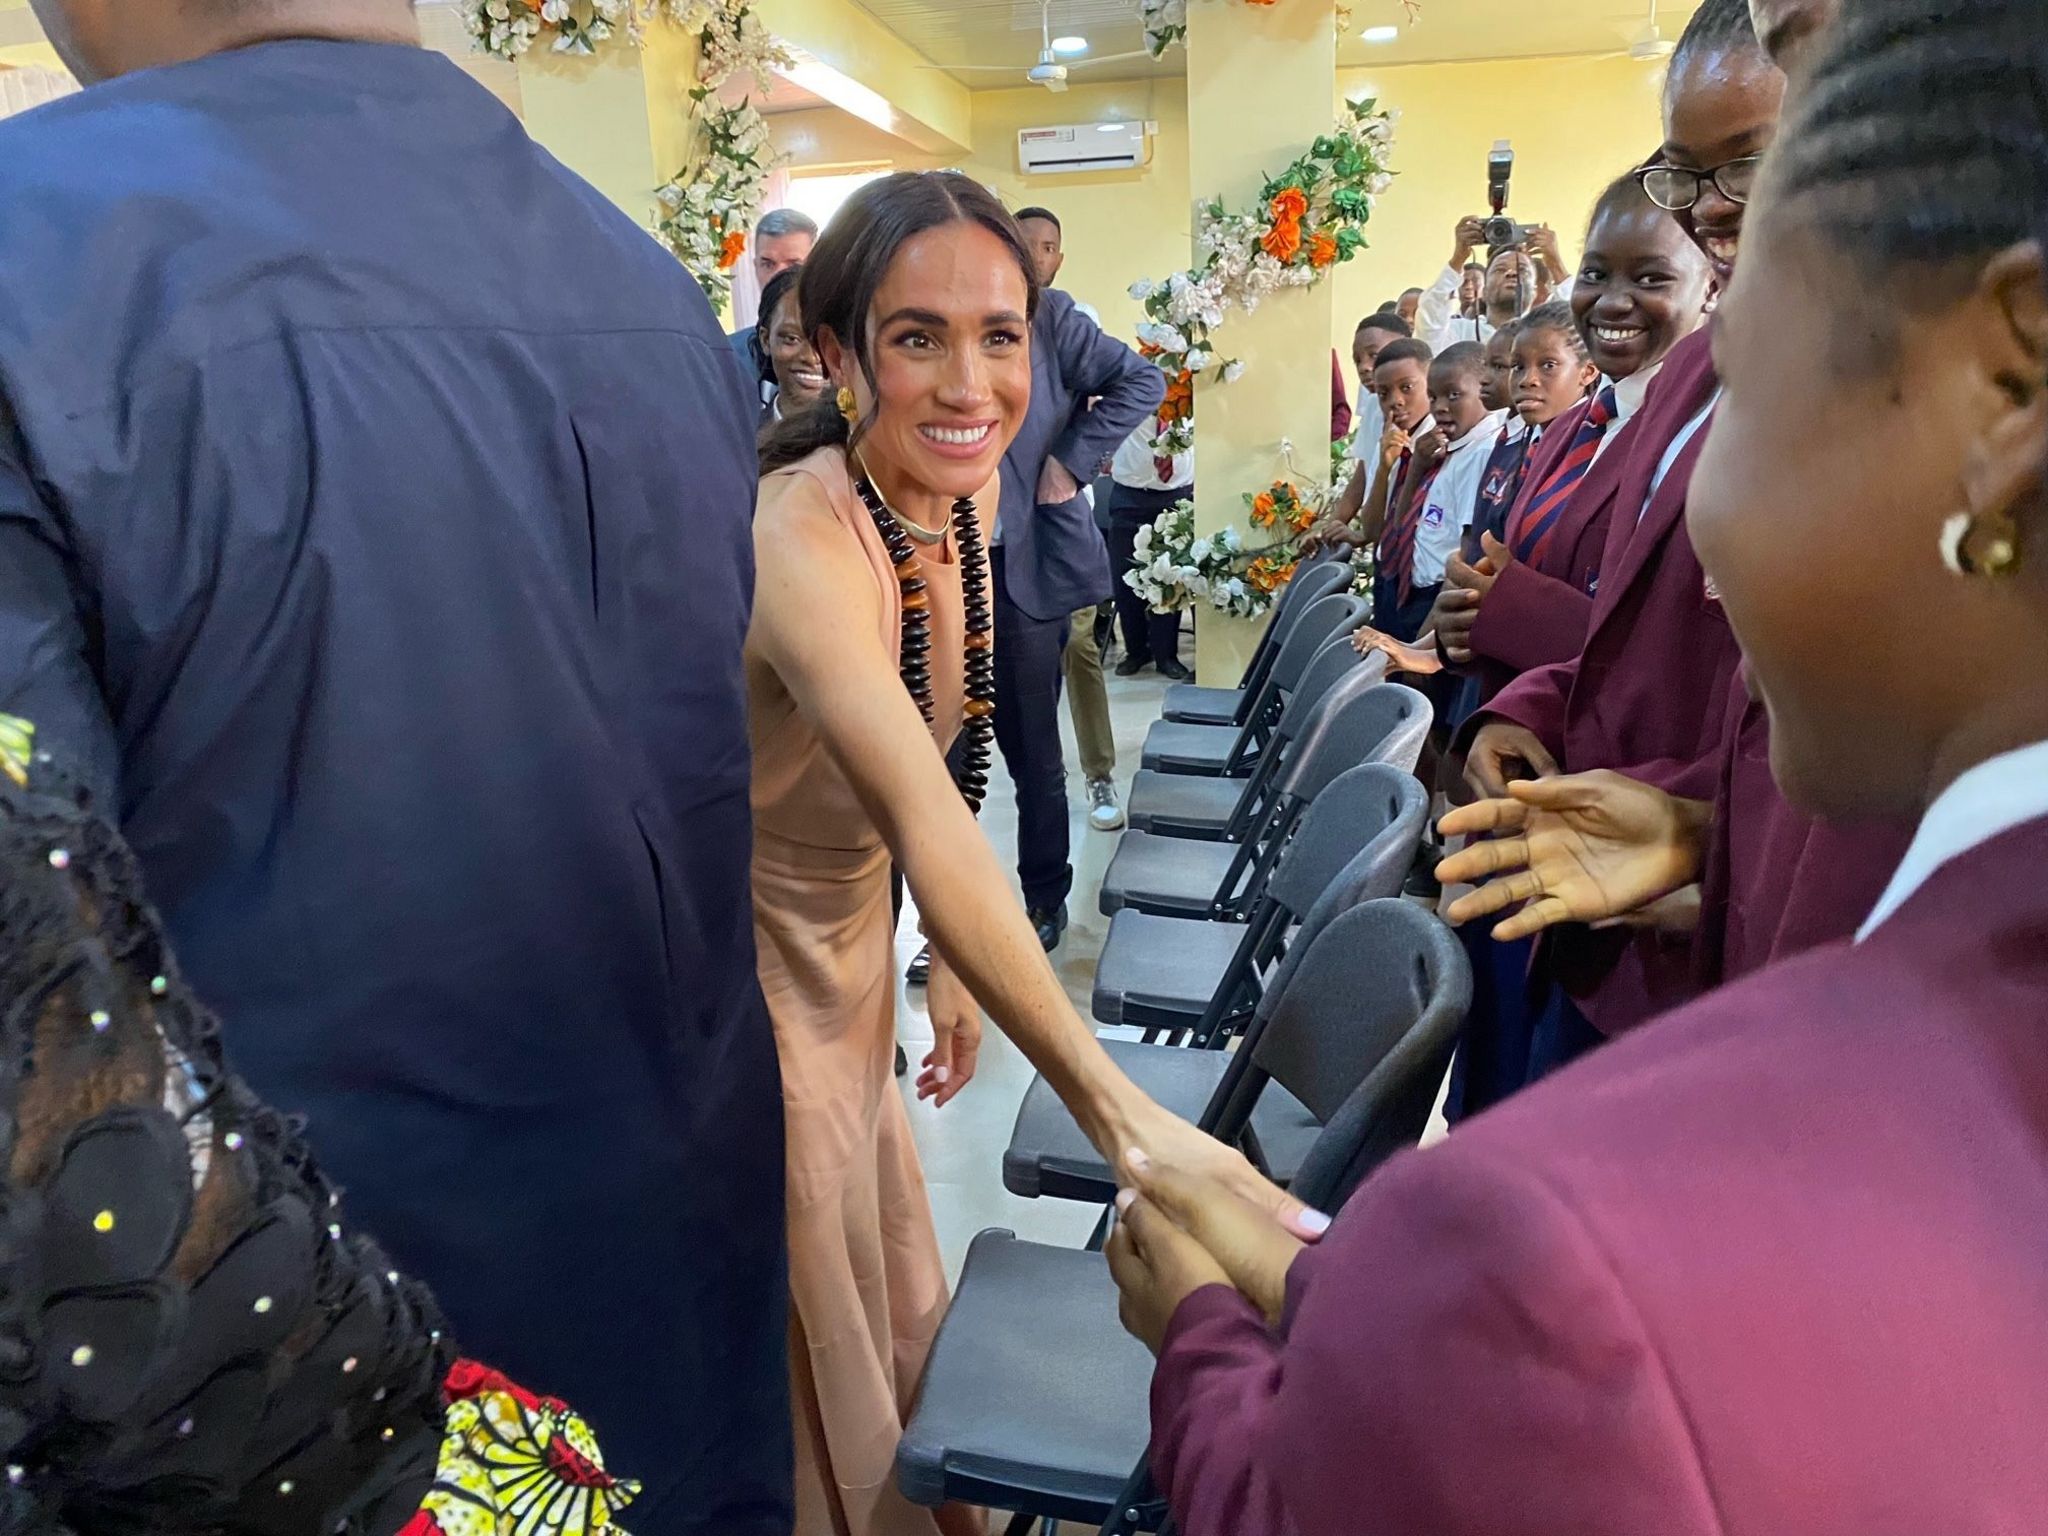 The Duchess of Sussex shaking hands with students at the Lightway Academy